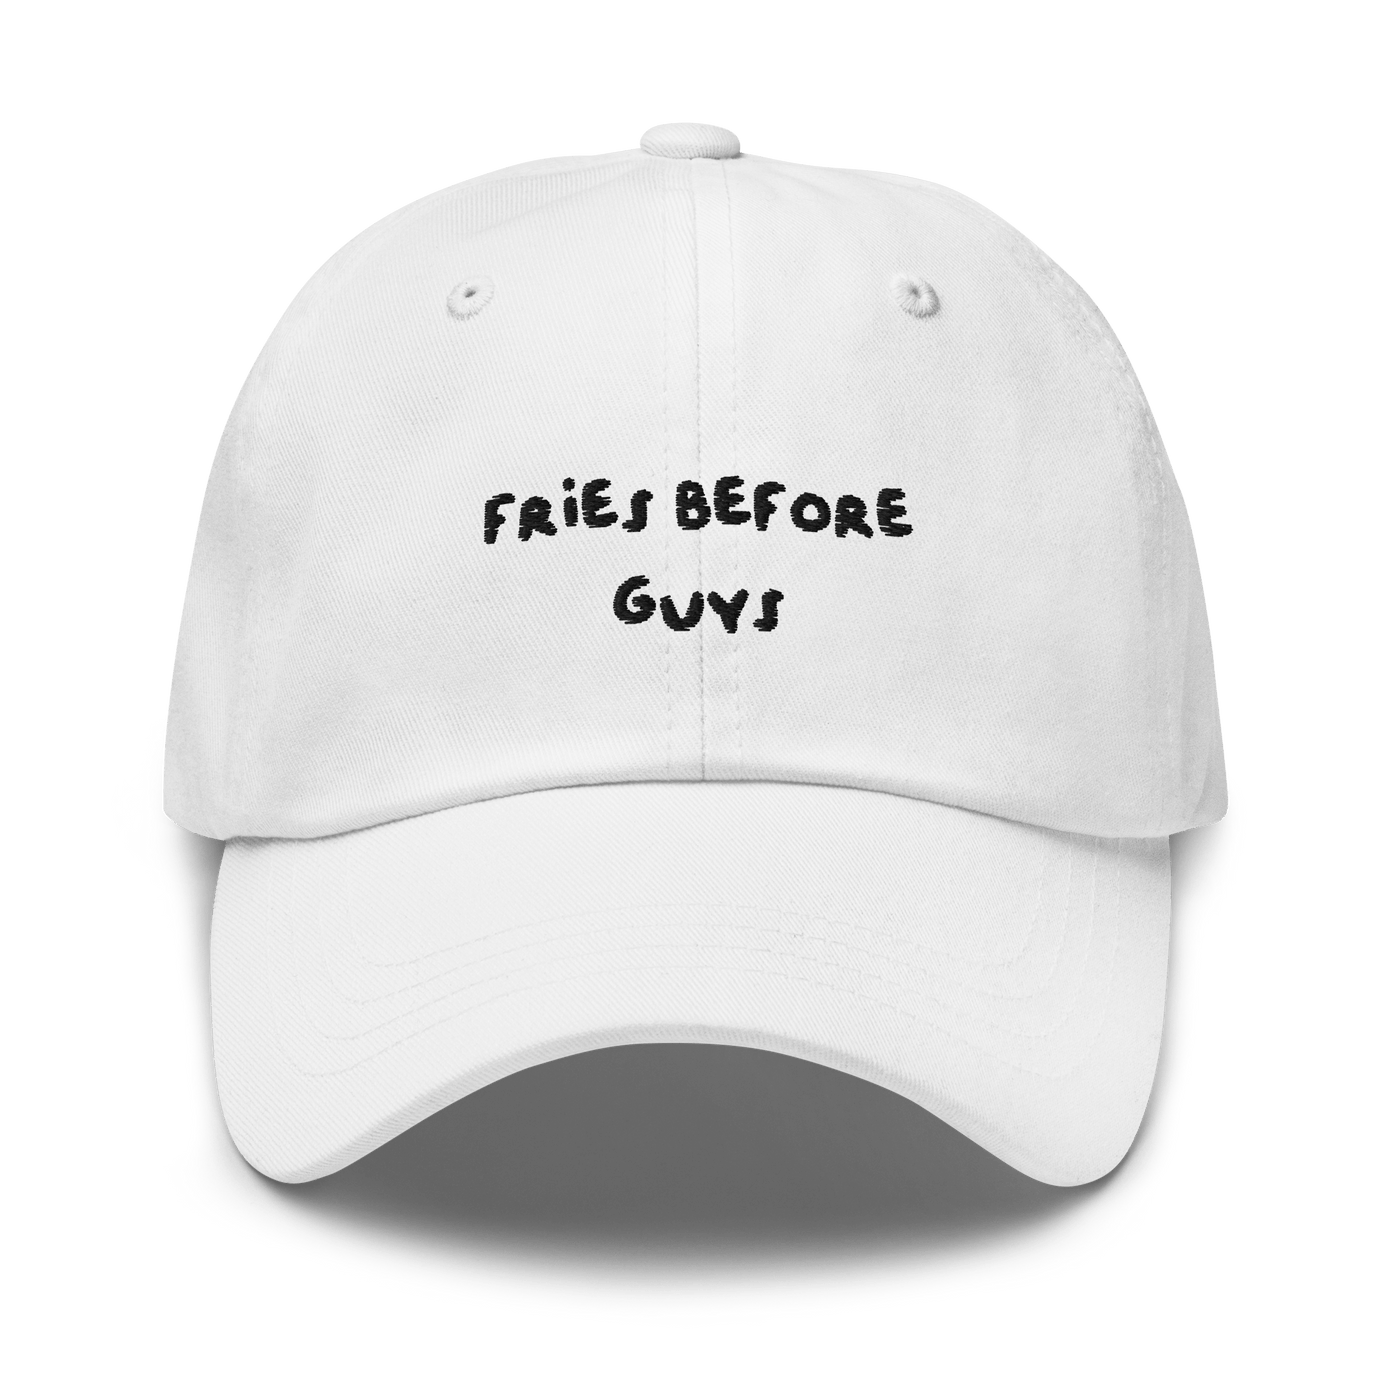 Fries Before Guys Dad hat - White - - Just Another Cap Store